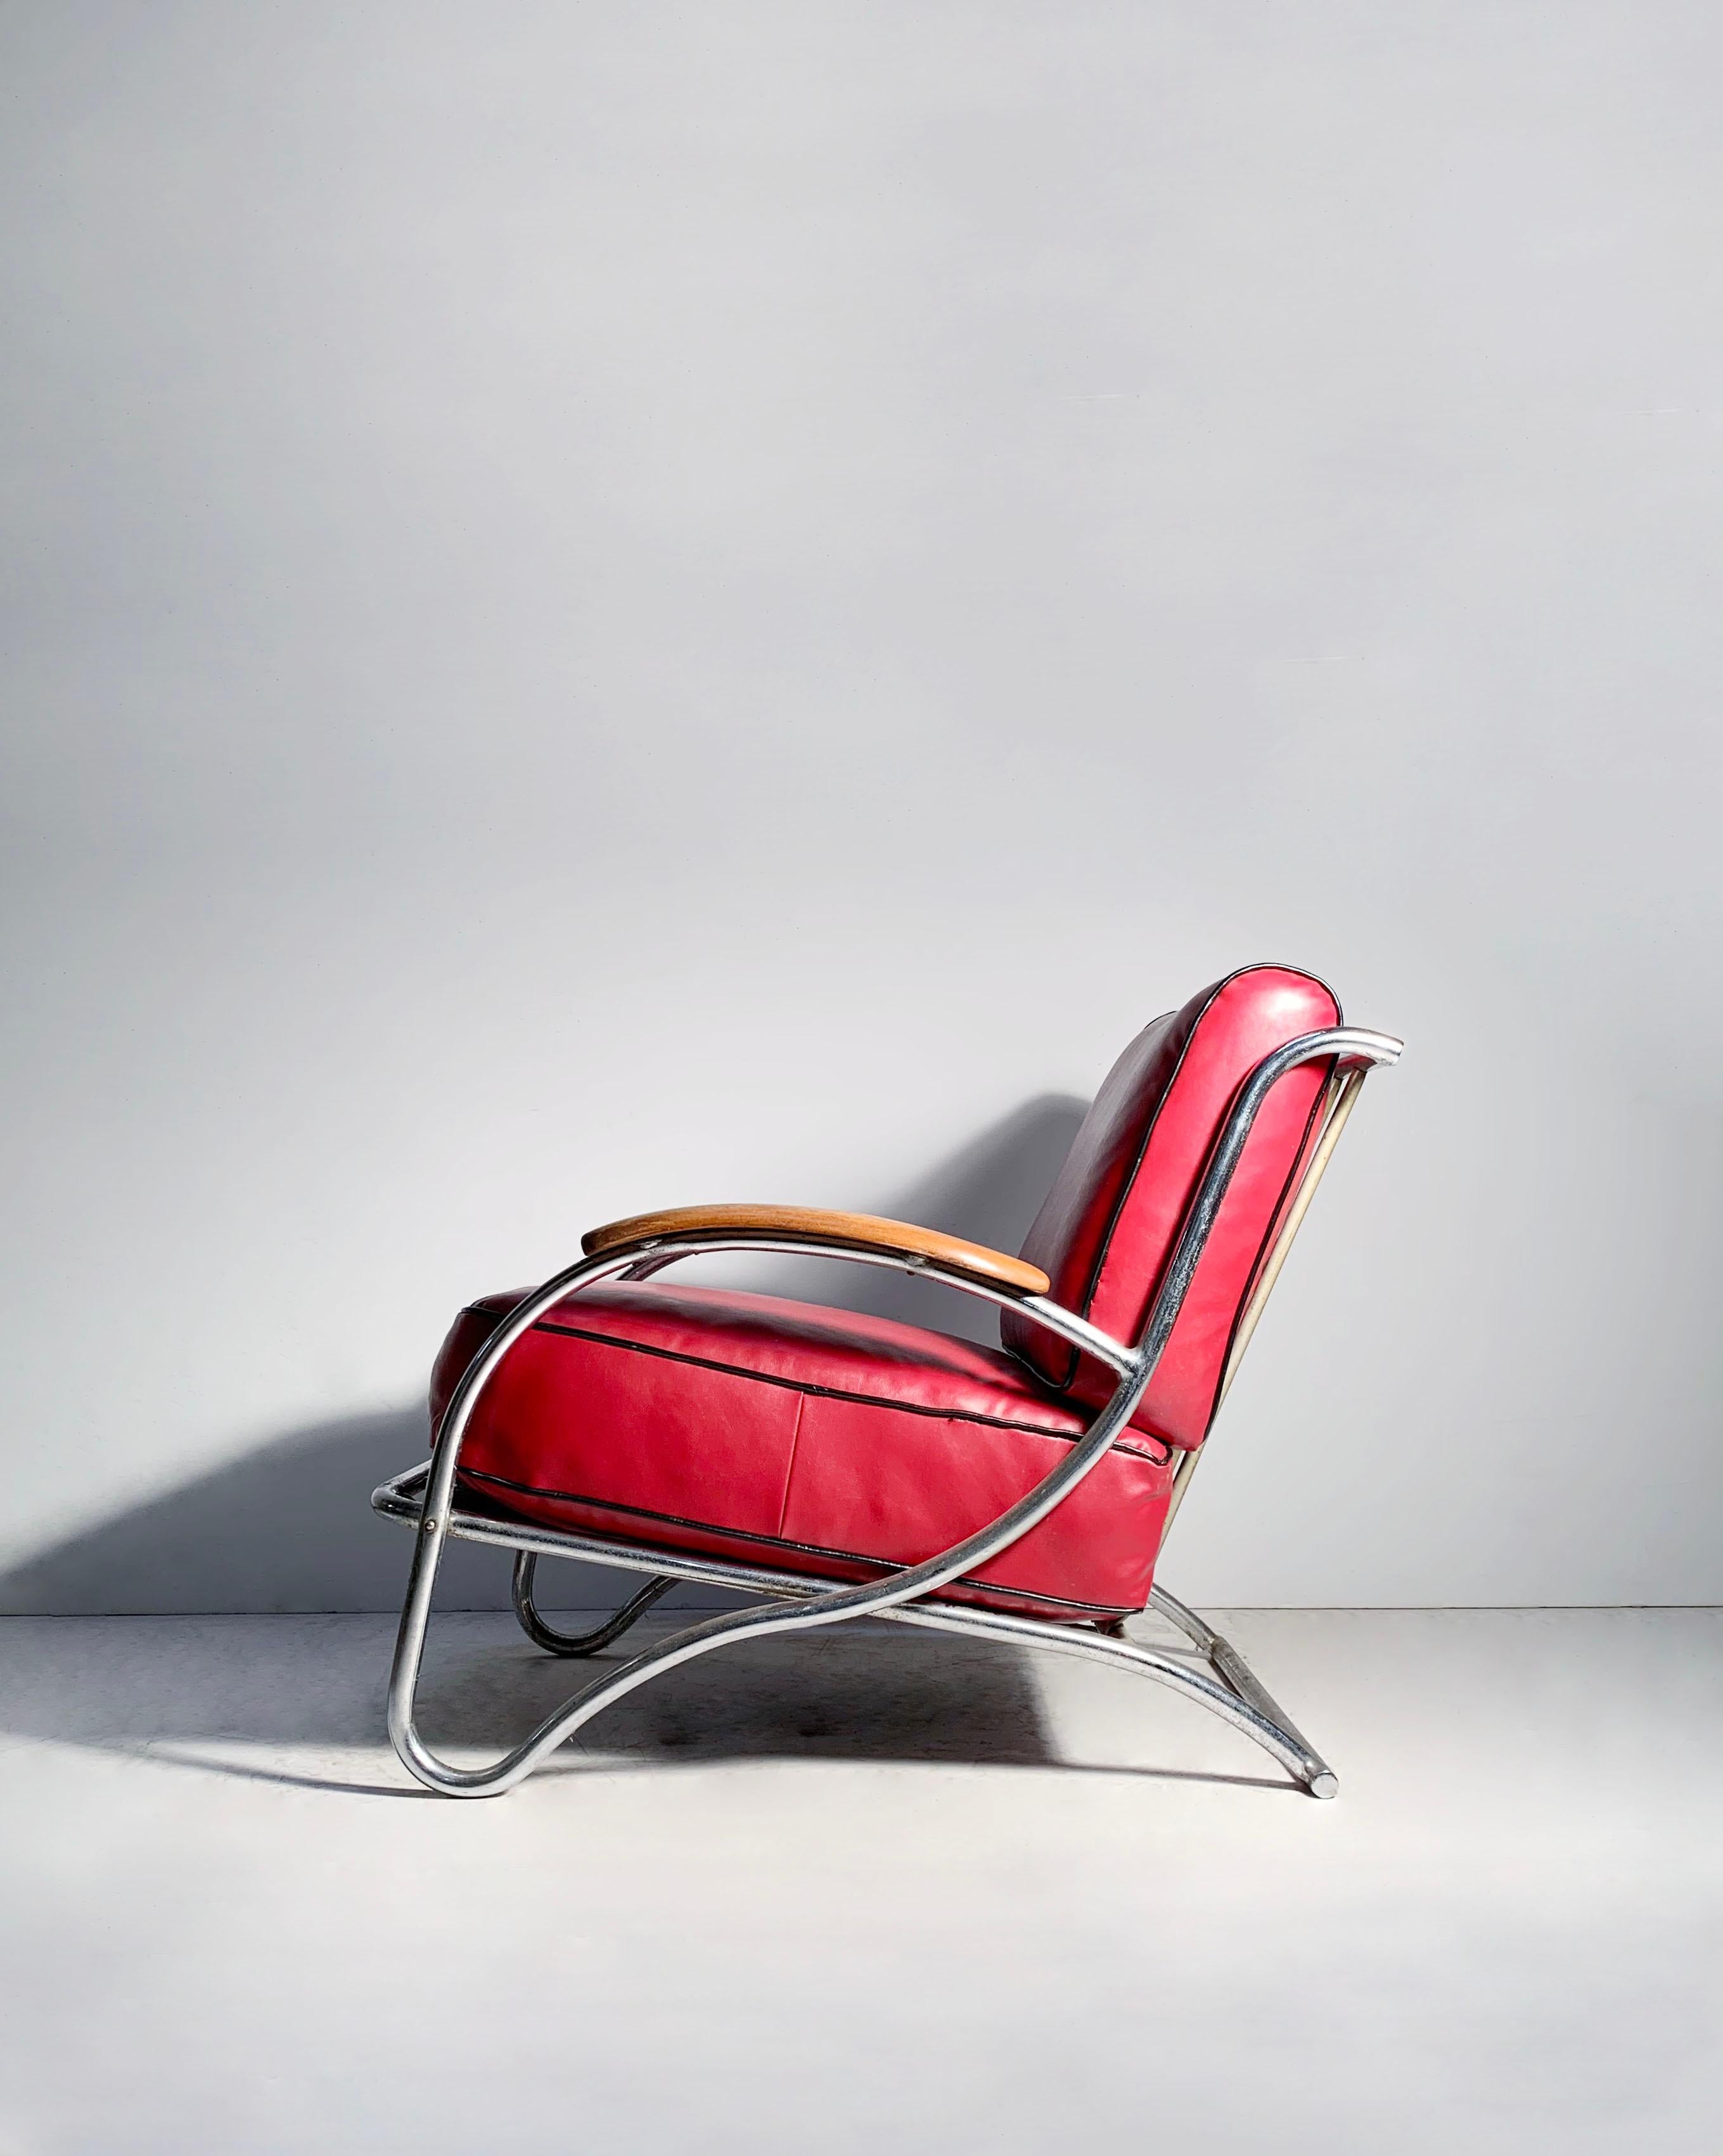 Rare Important Design Art Deco Lounge Chair by Kem Weber for Lloyd. All original in as found condition. Original Red Upholstery.  